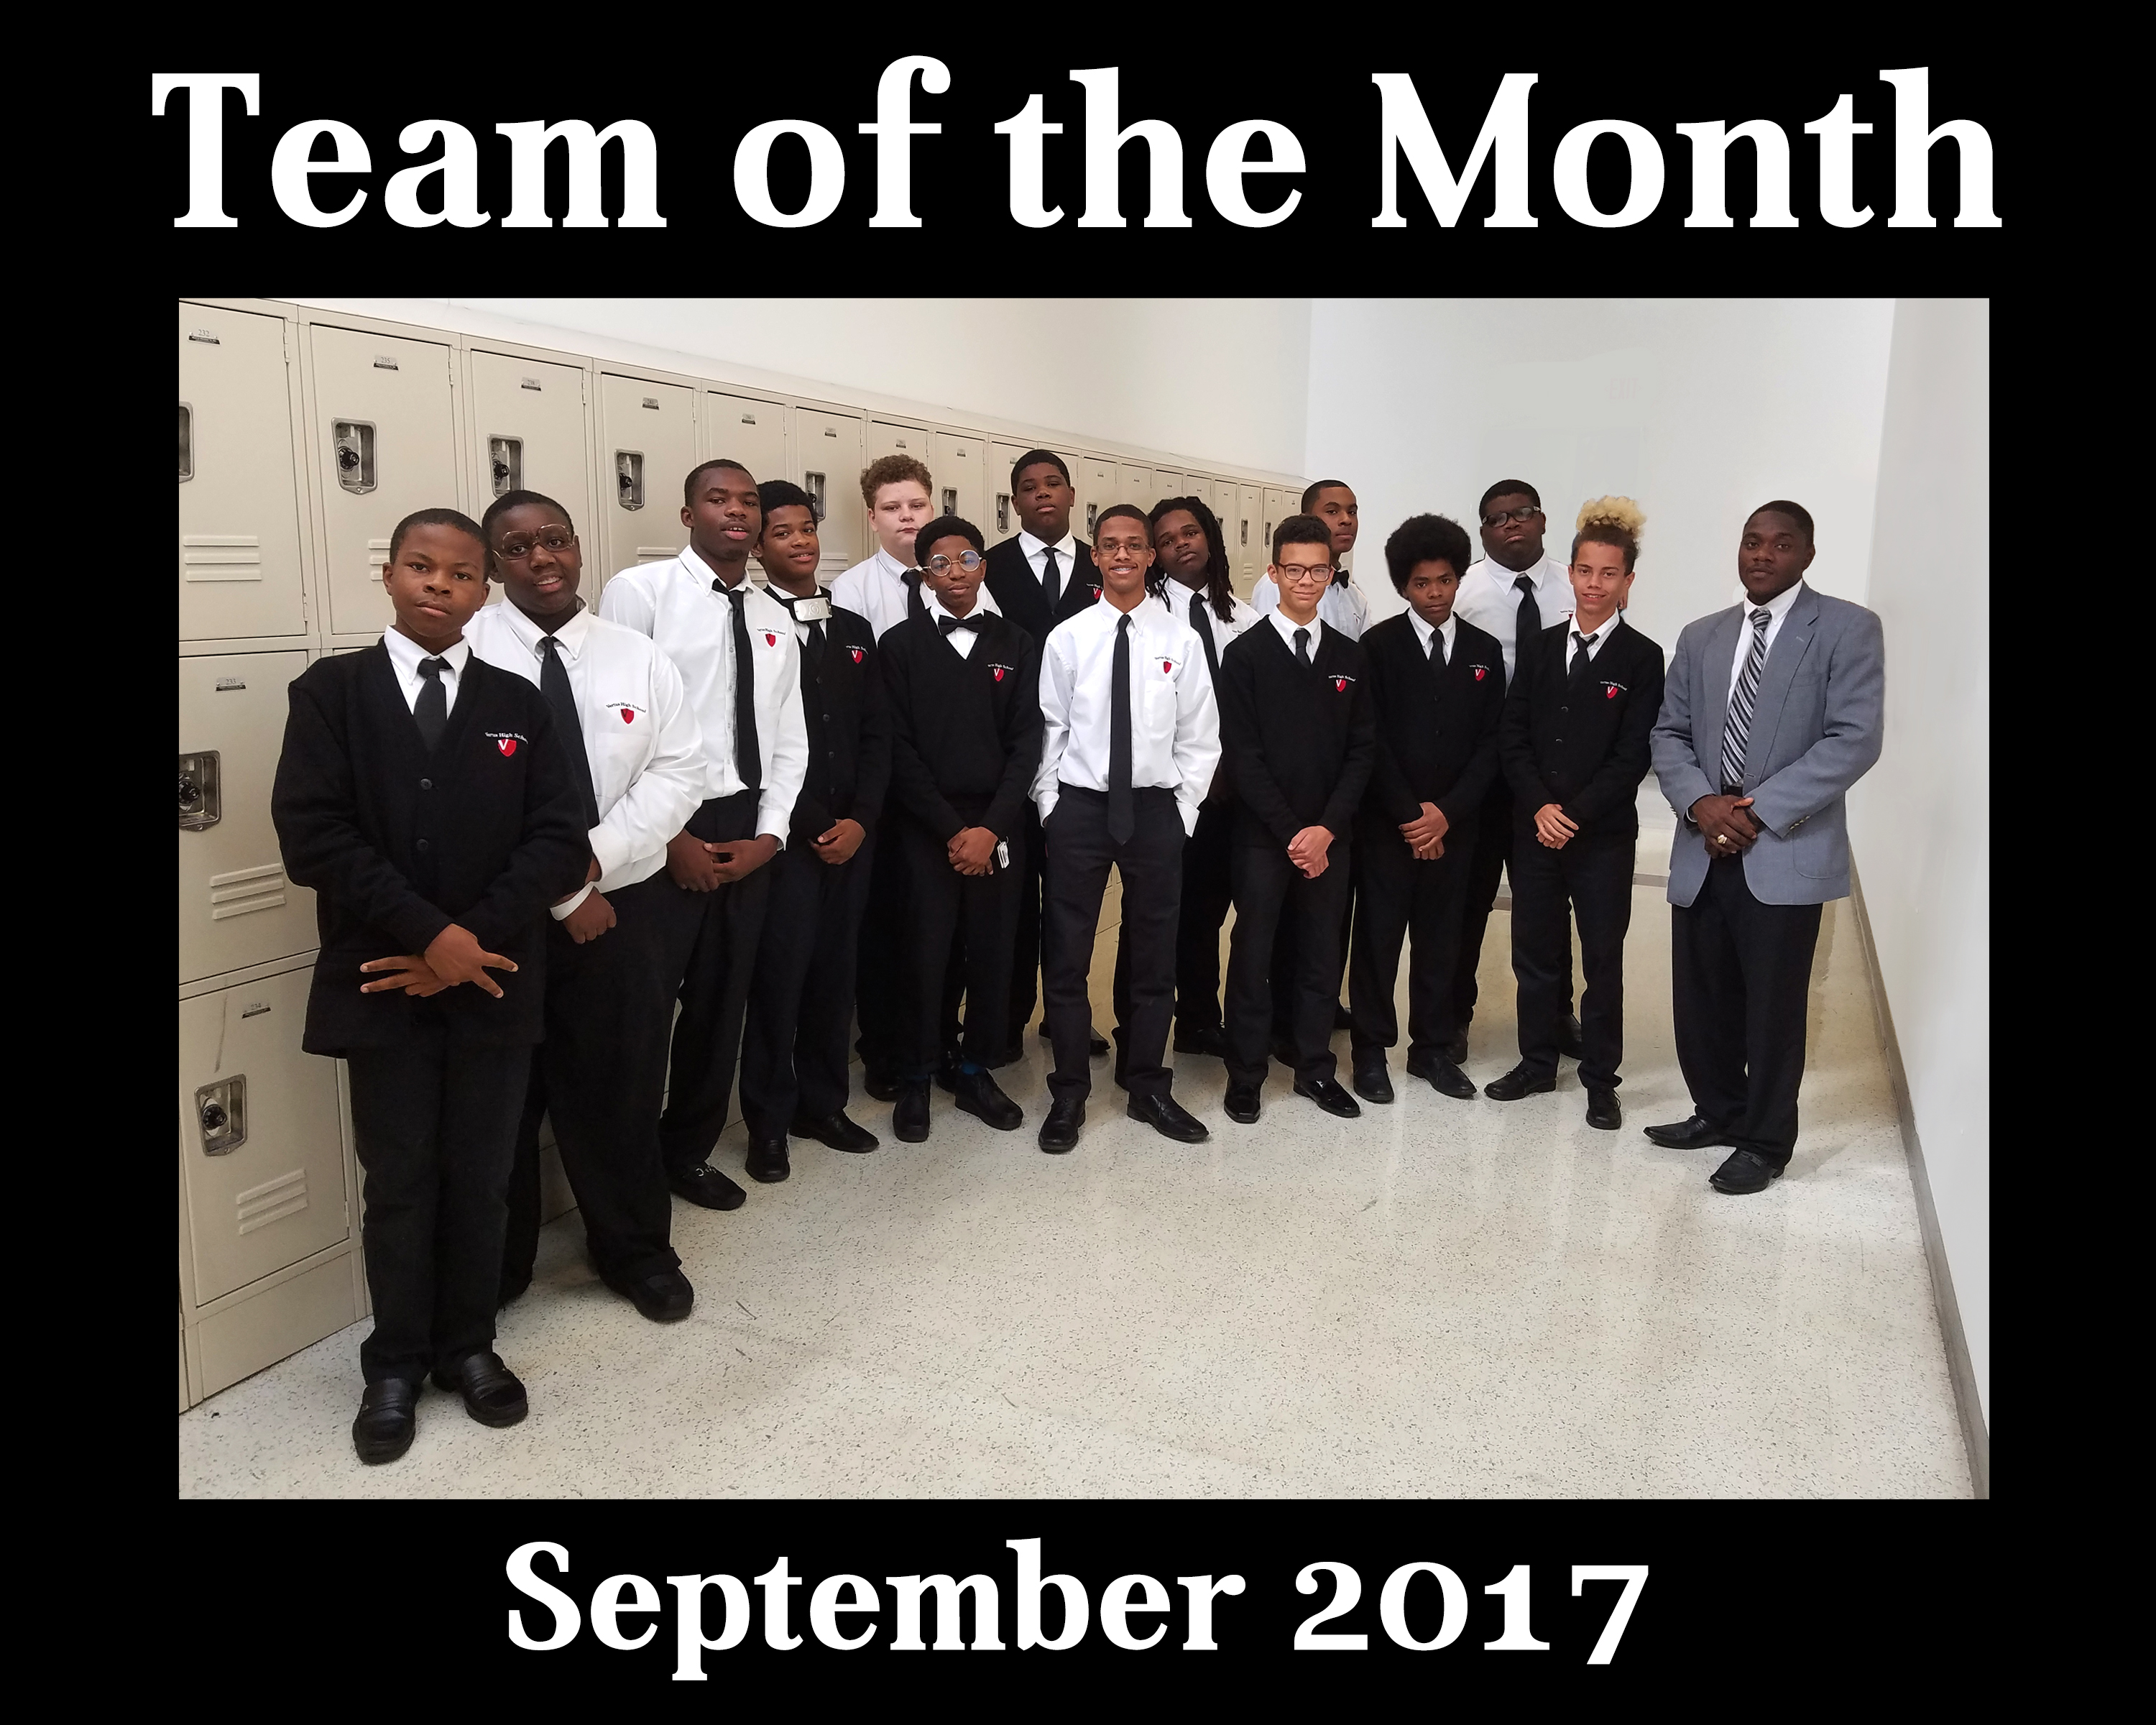 Team of the Month - September 2017